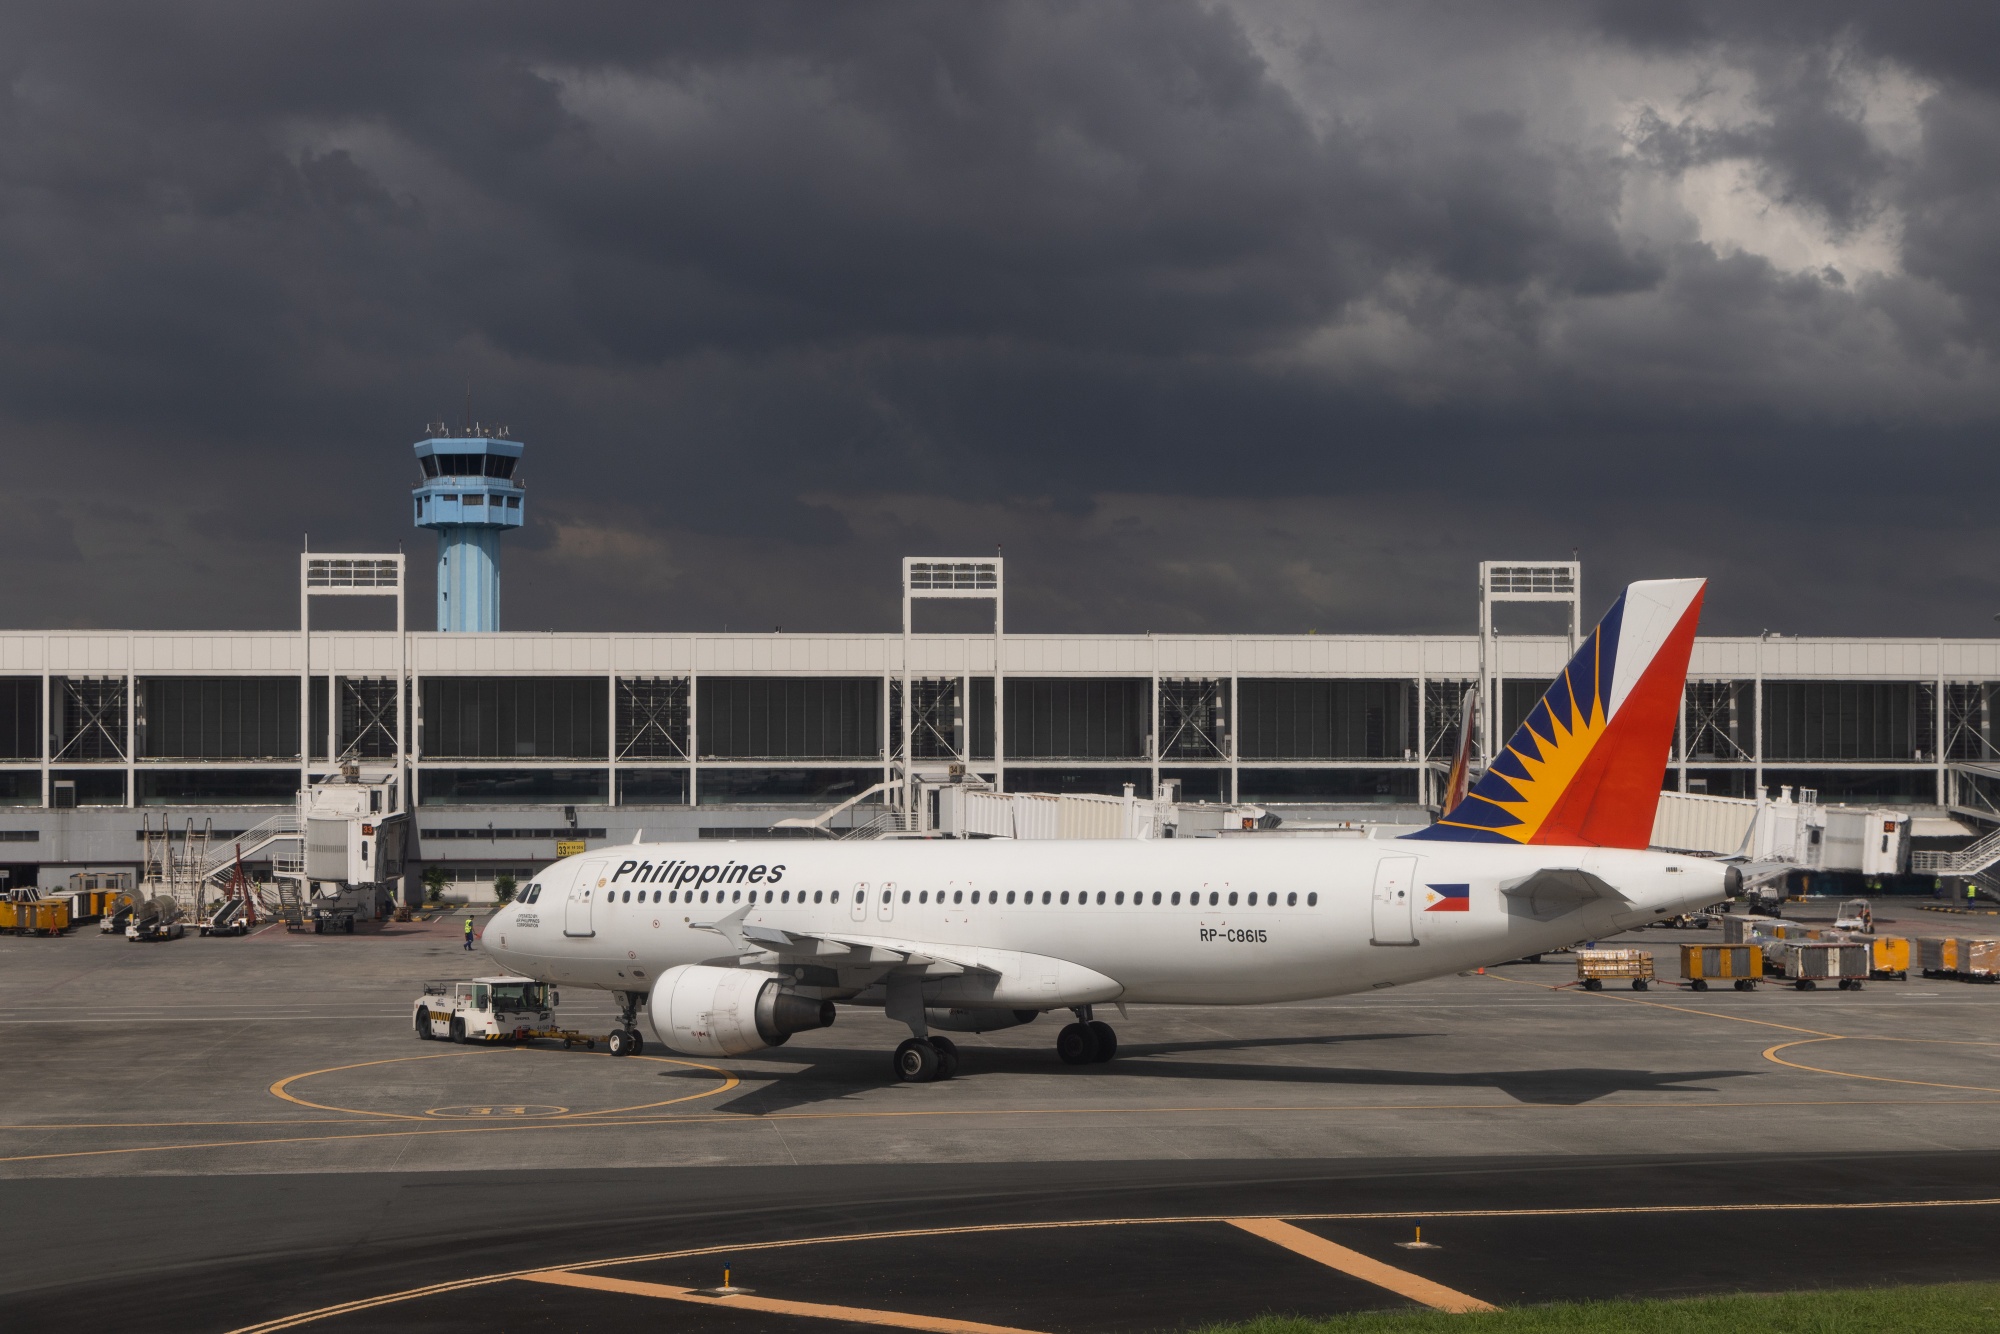 An Airbus SE A320-214 aircraft, operated by Philippine Airlines Inc., on the tarmac at the Ninoy Aquino International Airport in Manila, the Philippines.